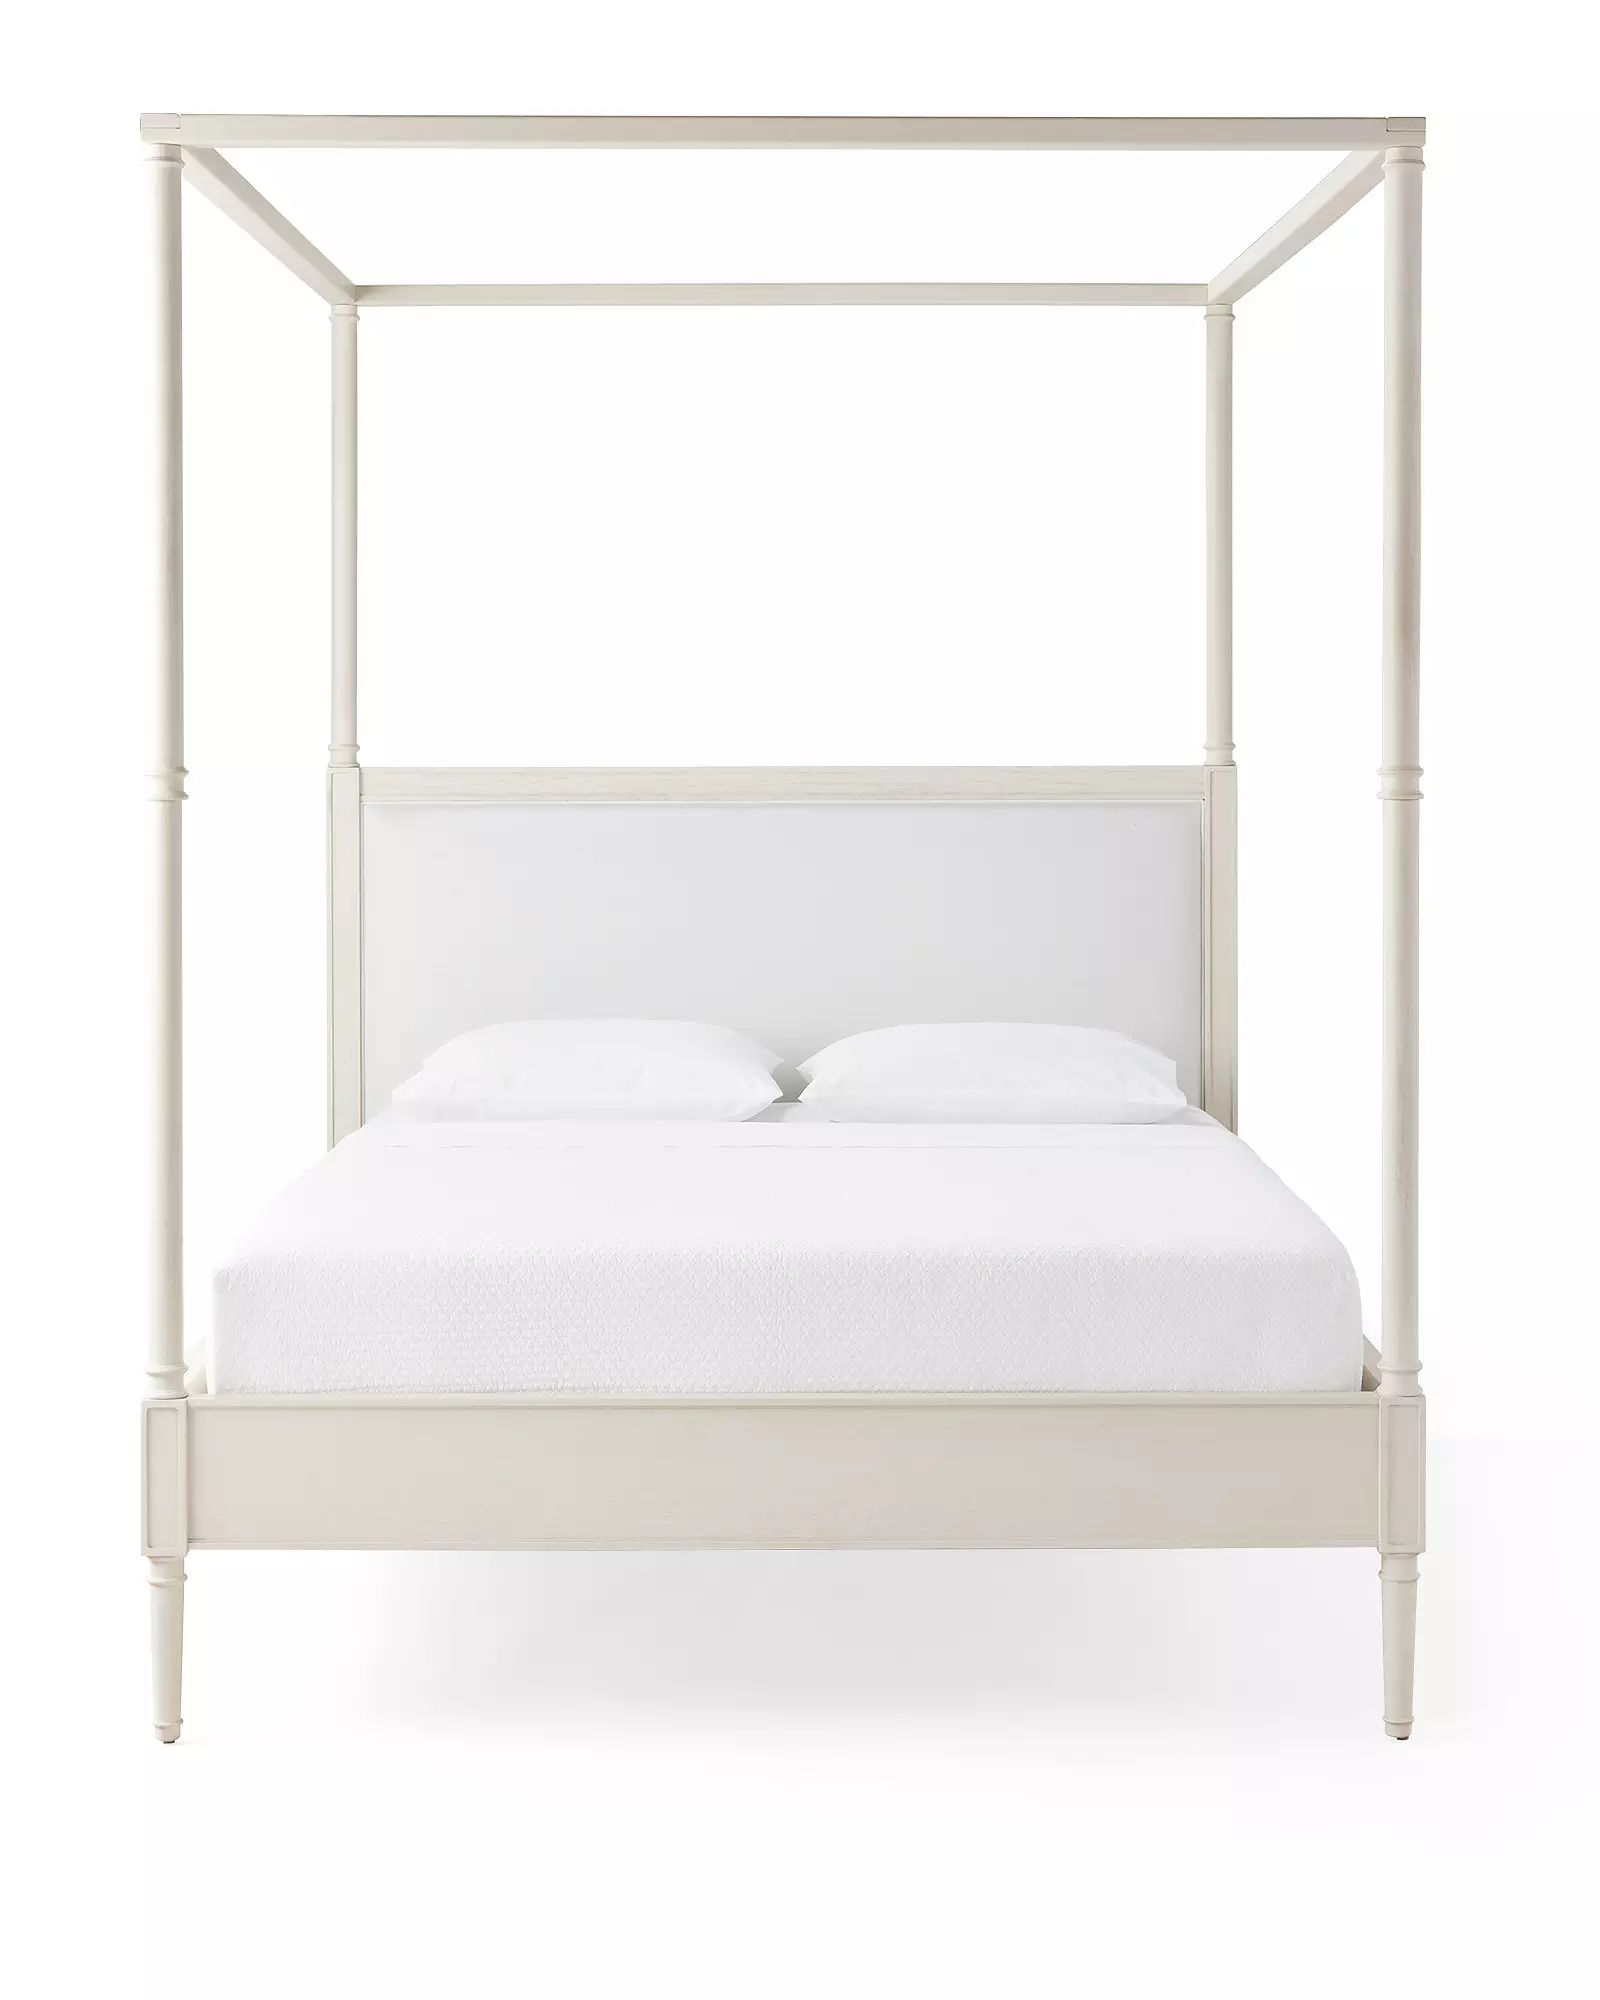 Bridgeway Four Poster Bed - Washed White | Serena and Lily